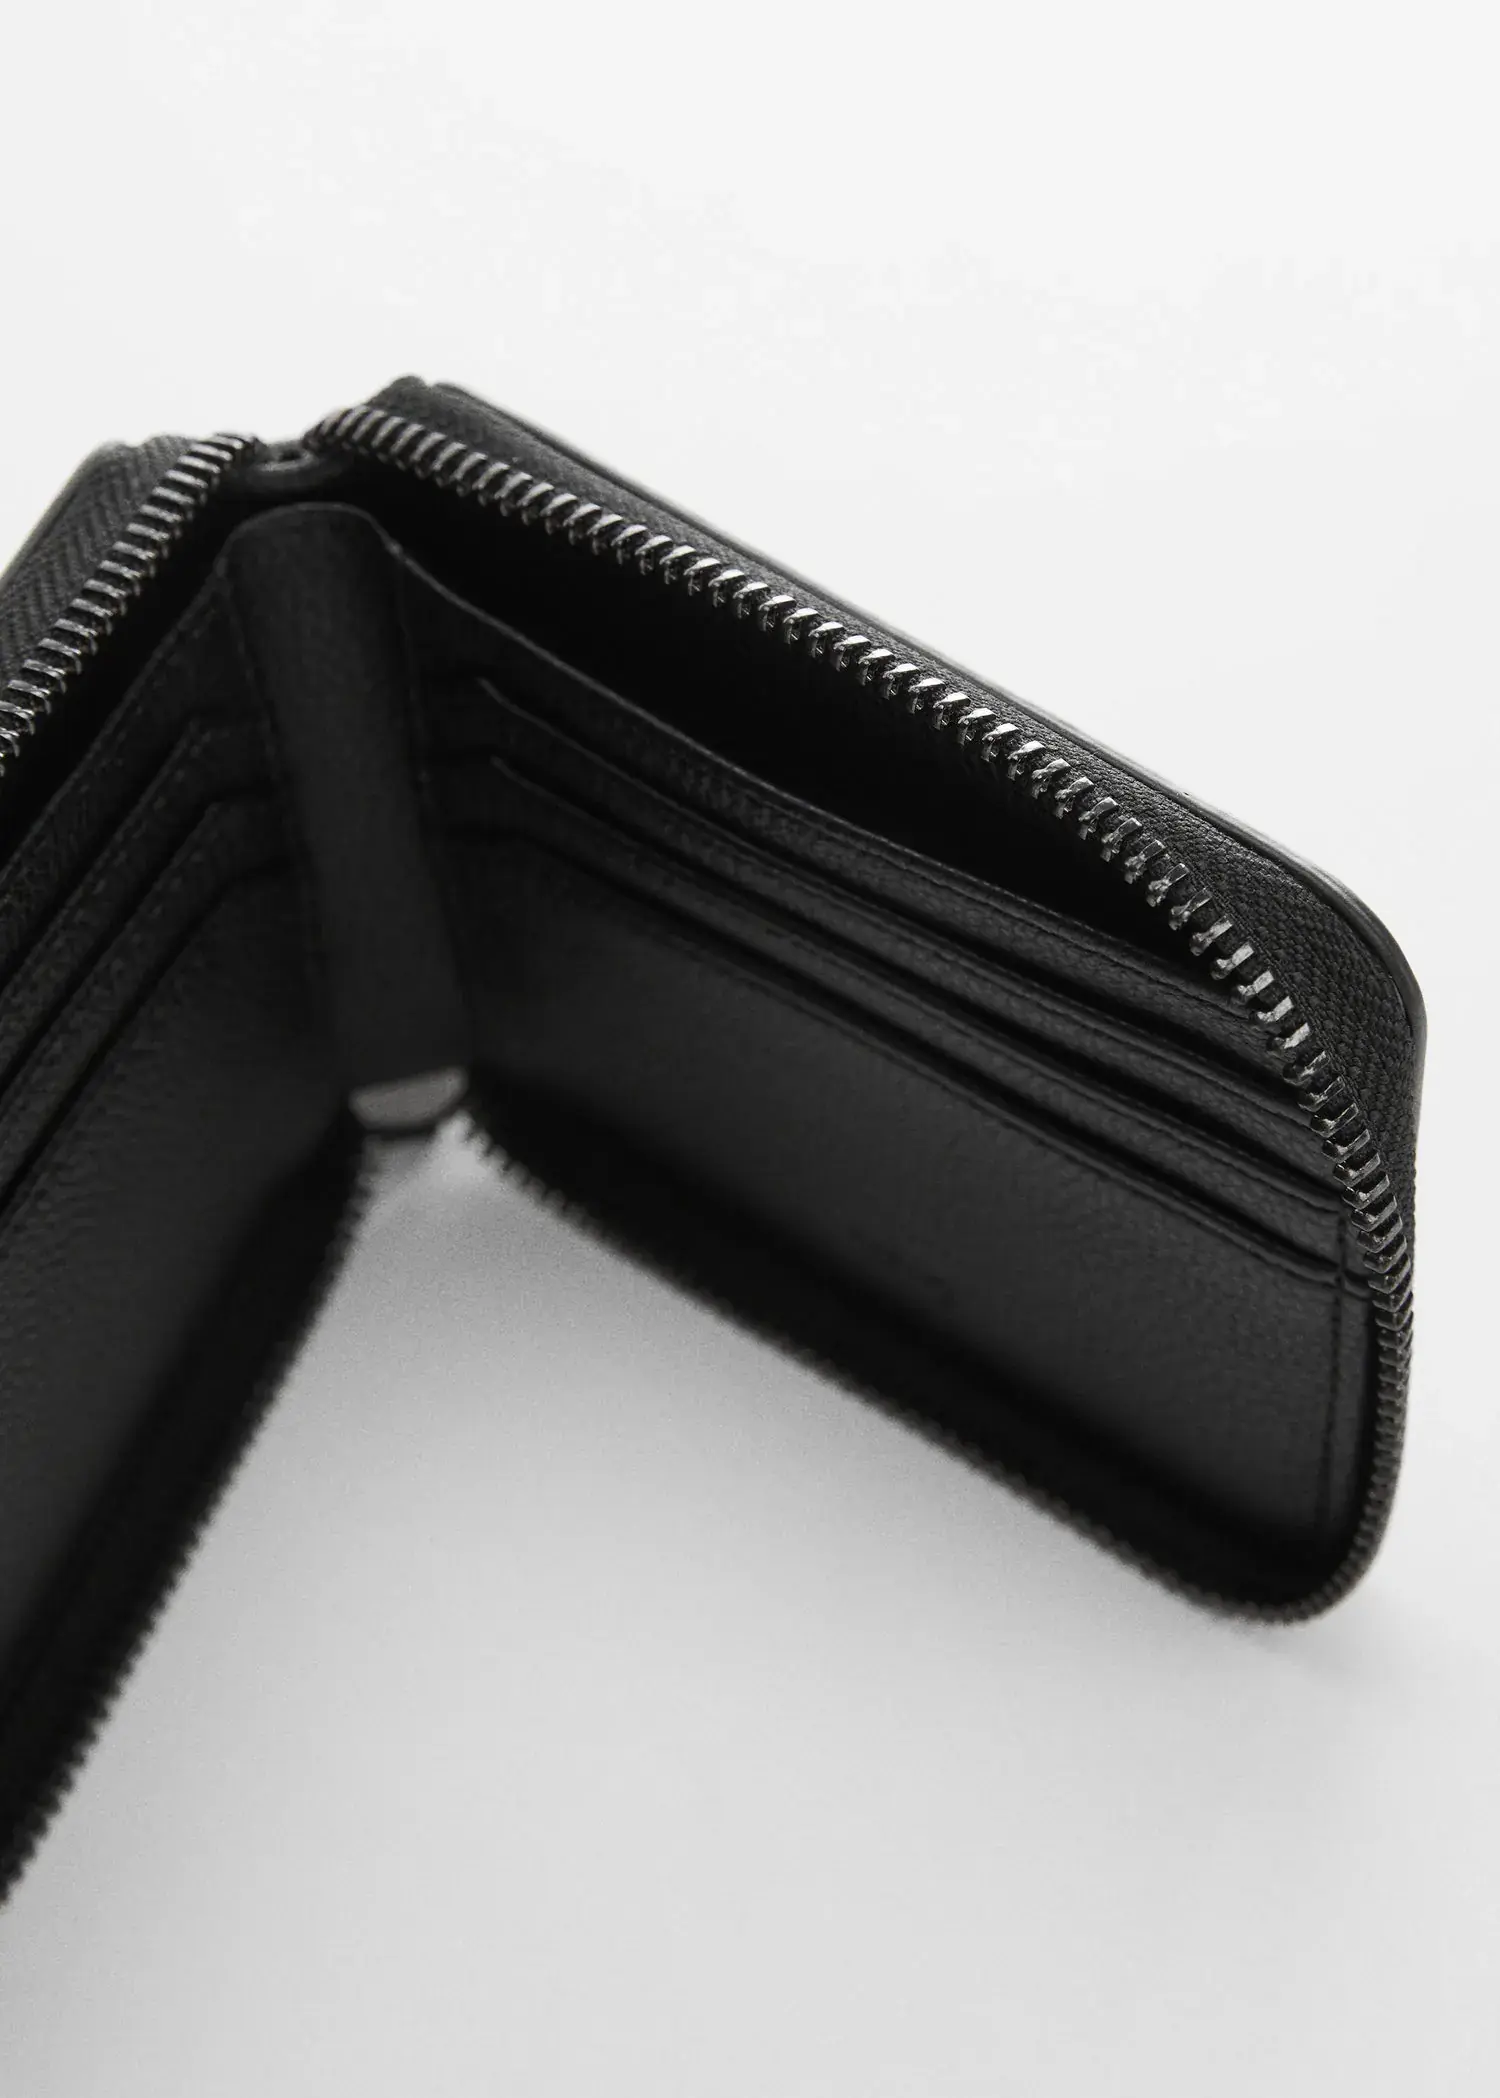 Mango Anti-contactless leather-effect card holder. a close-up of the inside of a black wallet. 